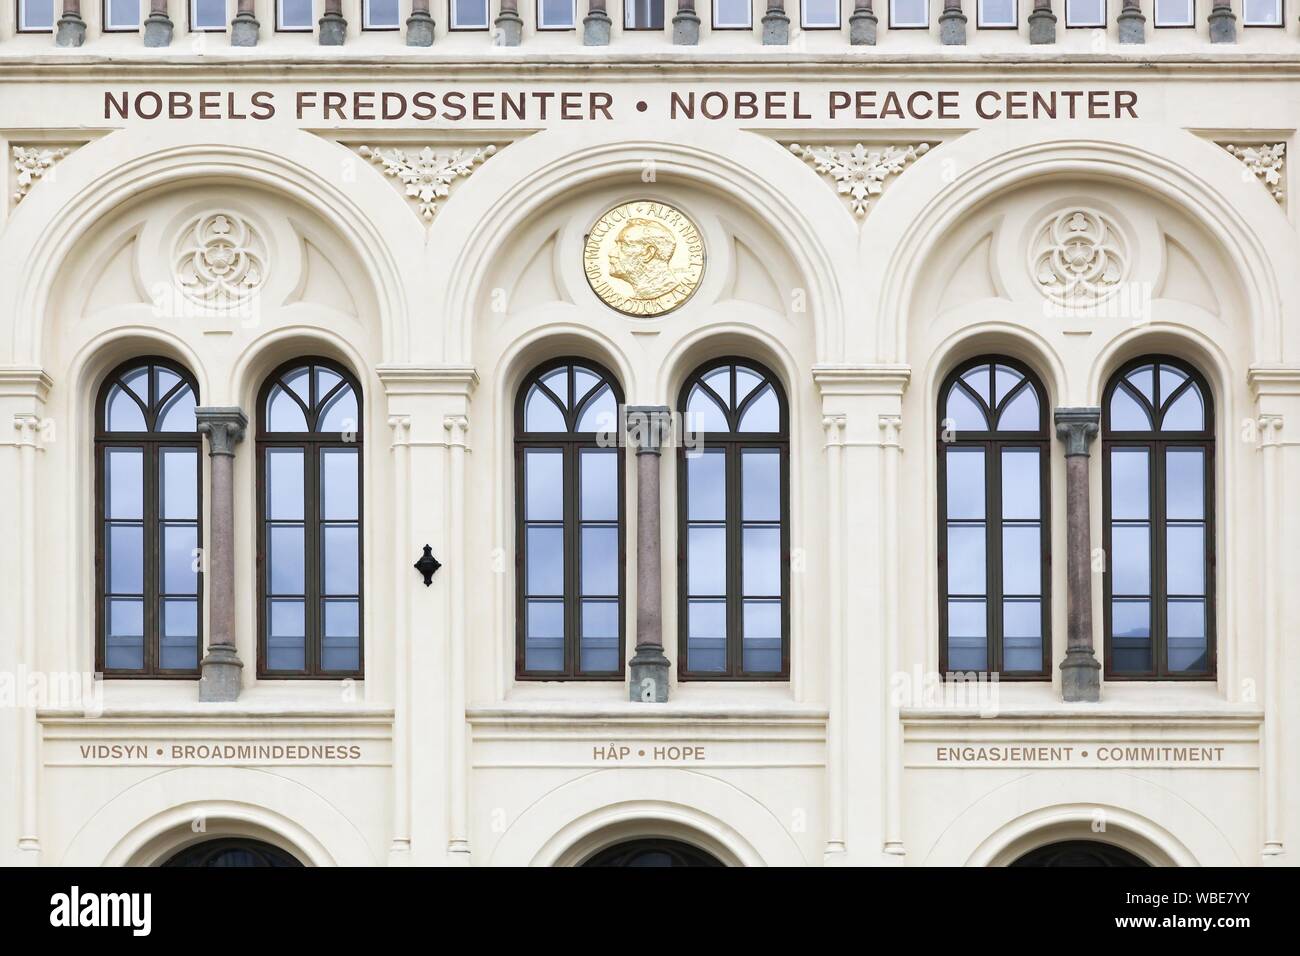 Oslo, Norway - August 27, 2018: Facade of the Nobel peace center. The Nobel Peace Center in Oslo is a showcase for the Nobel Peace Prize Stock Photo